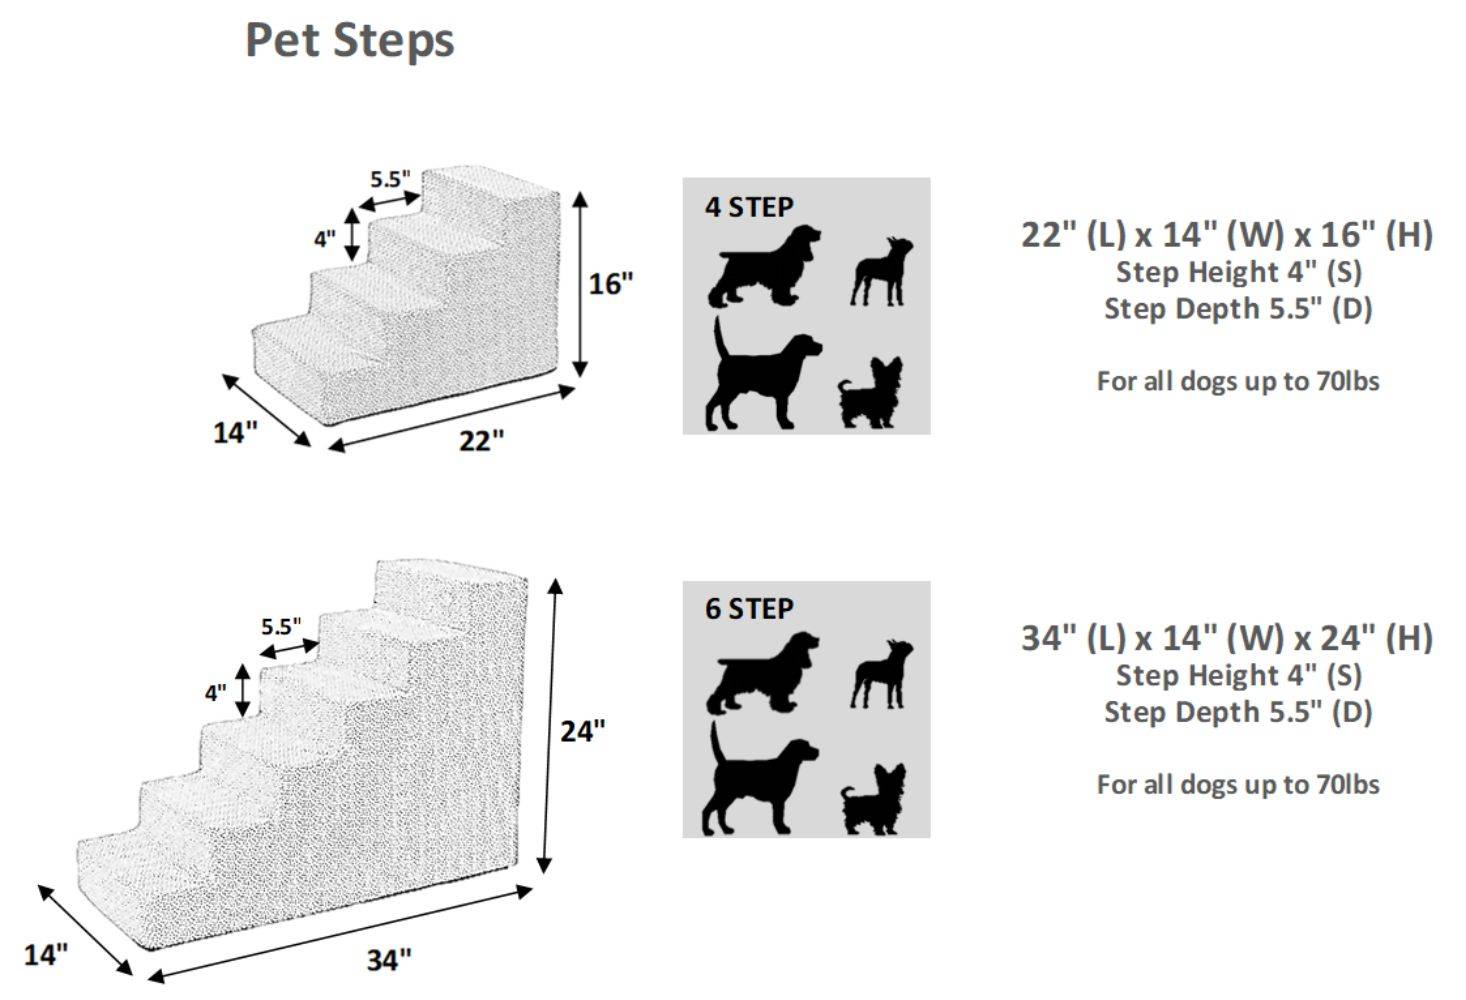 Bowsers The Pet Steps Outer Cover Size Guide